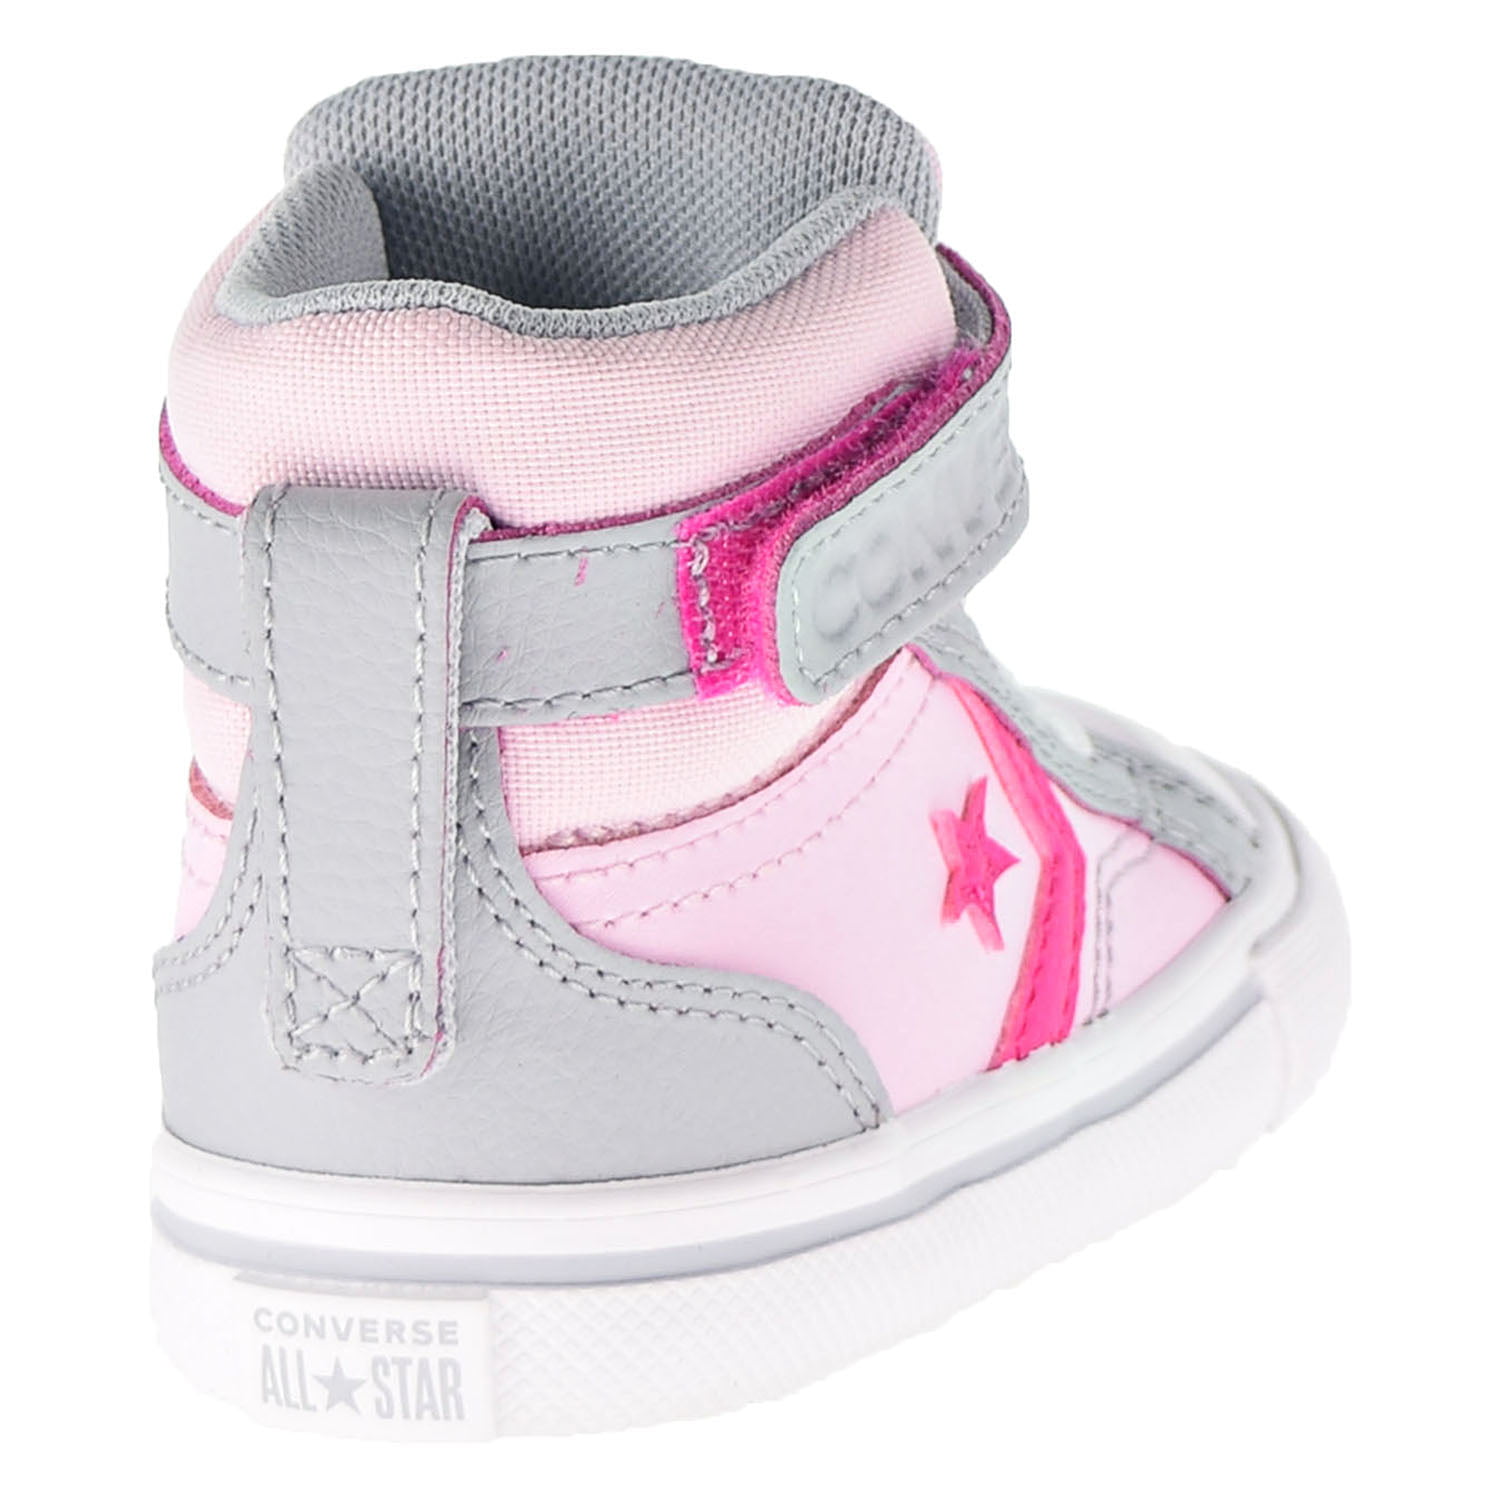 Shoes Converse Foam-Wolf Strap Two-Tone (2 Pro 766052c US) Hi M Leather Toddler Pink Blaze Grey